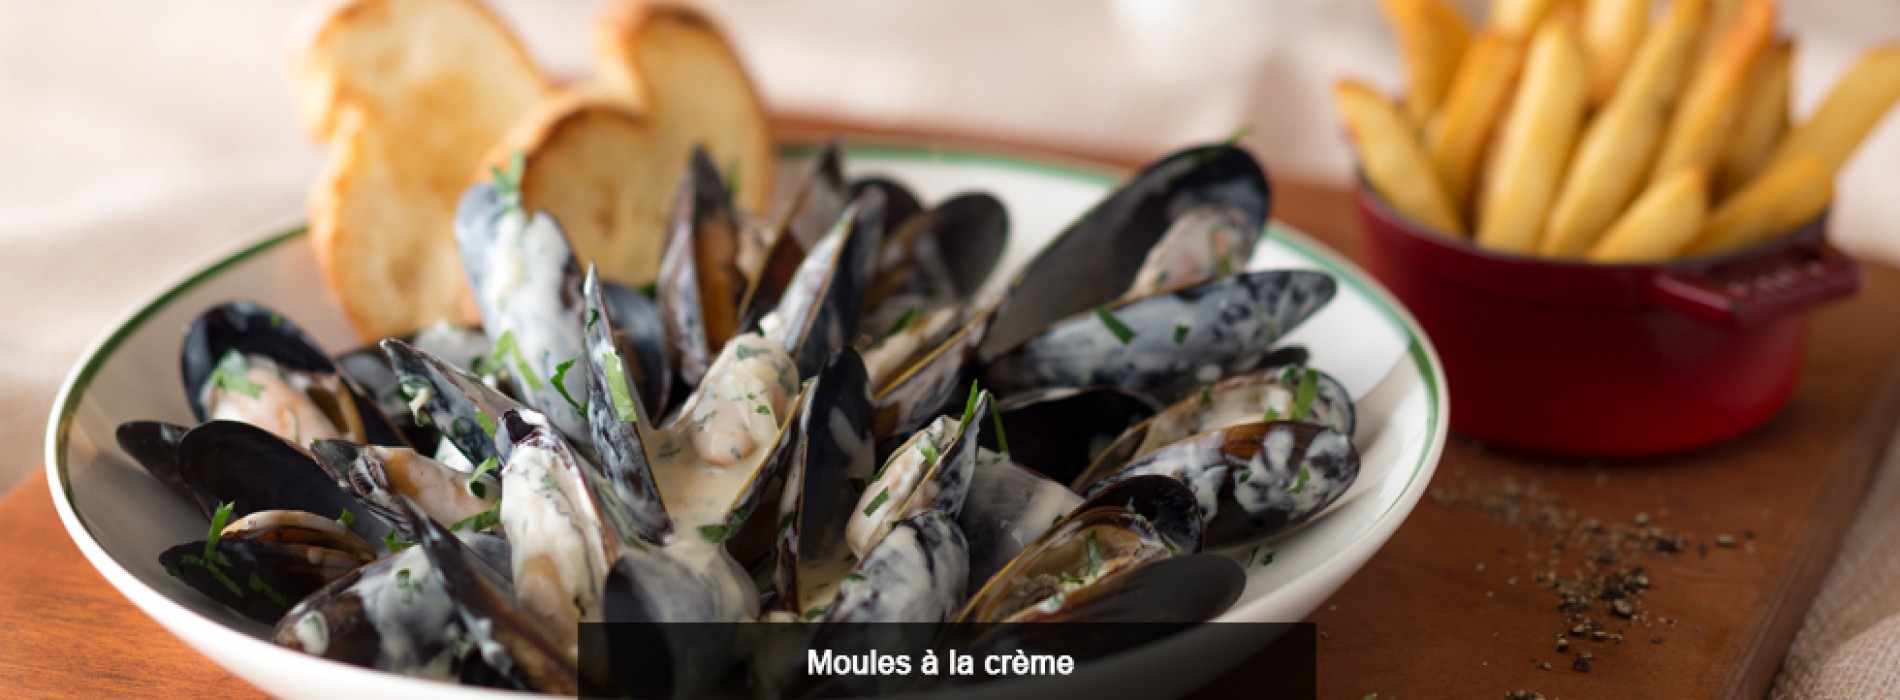 Indulge in Le French GourMay Champagne-Paired Menu at The Parisian Macao Brasserie restaurant